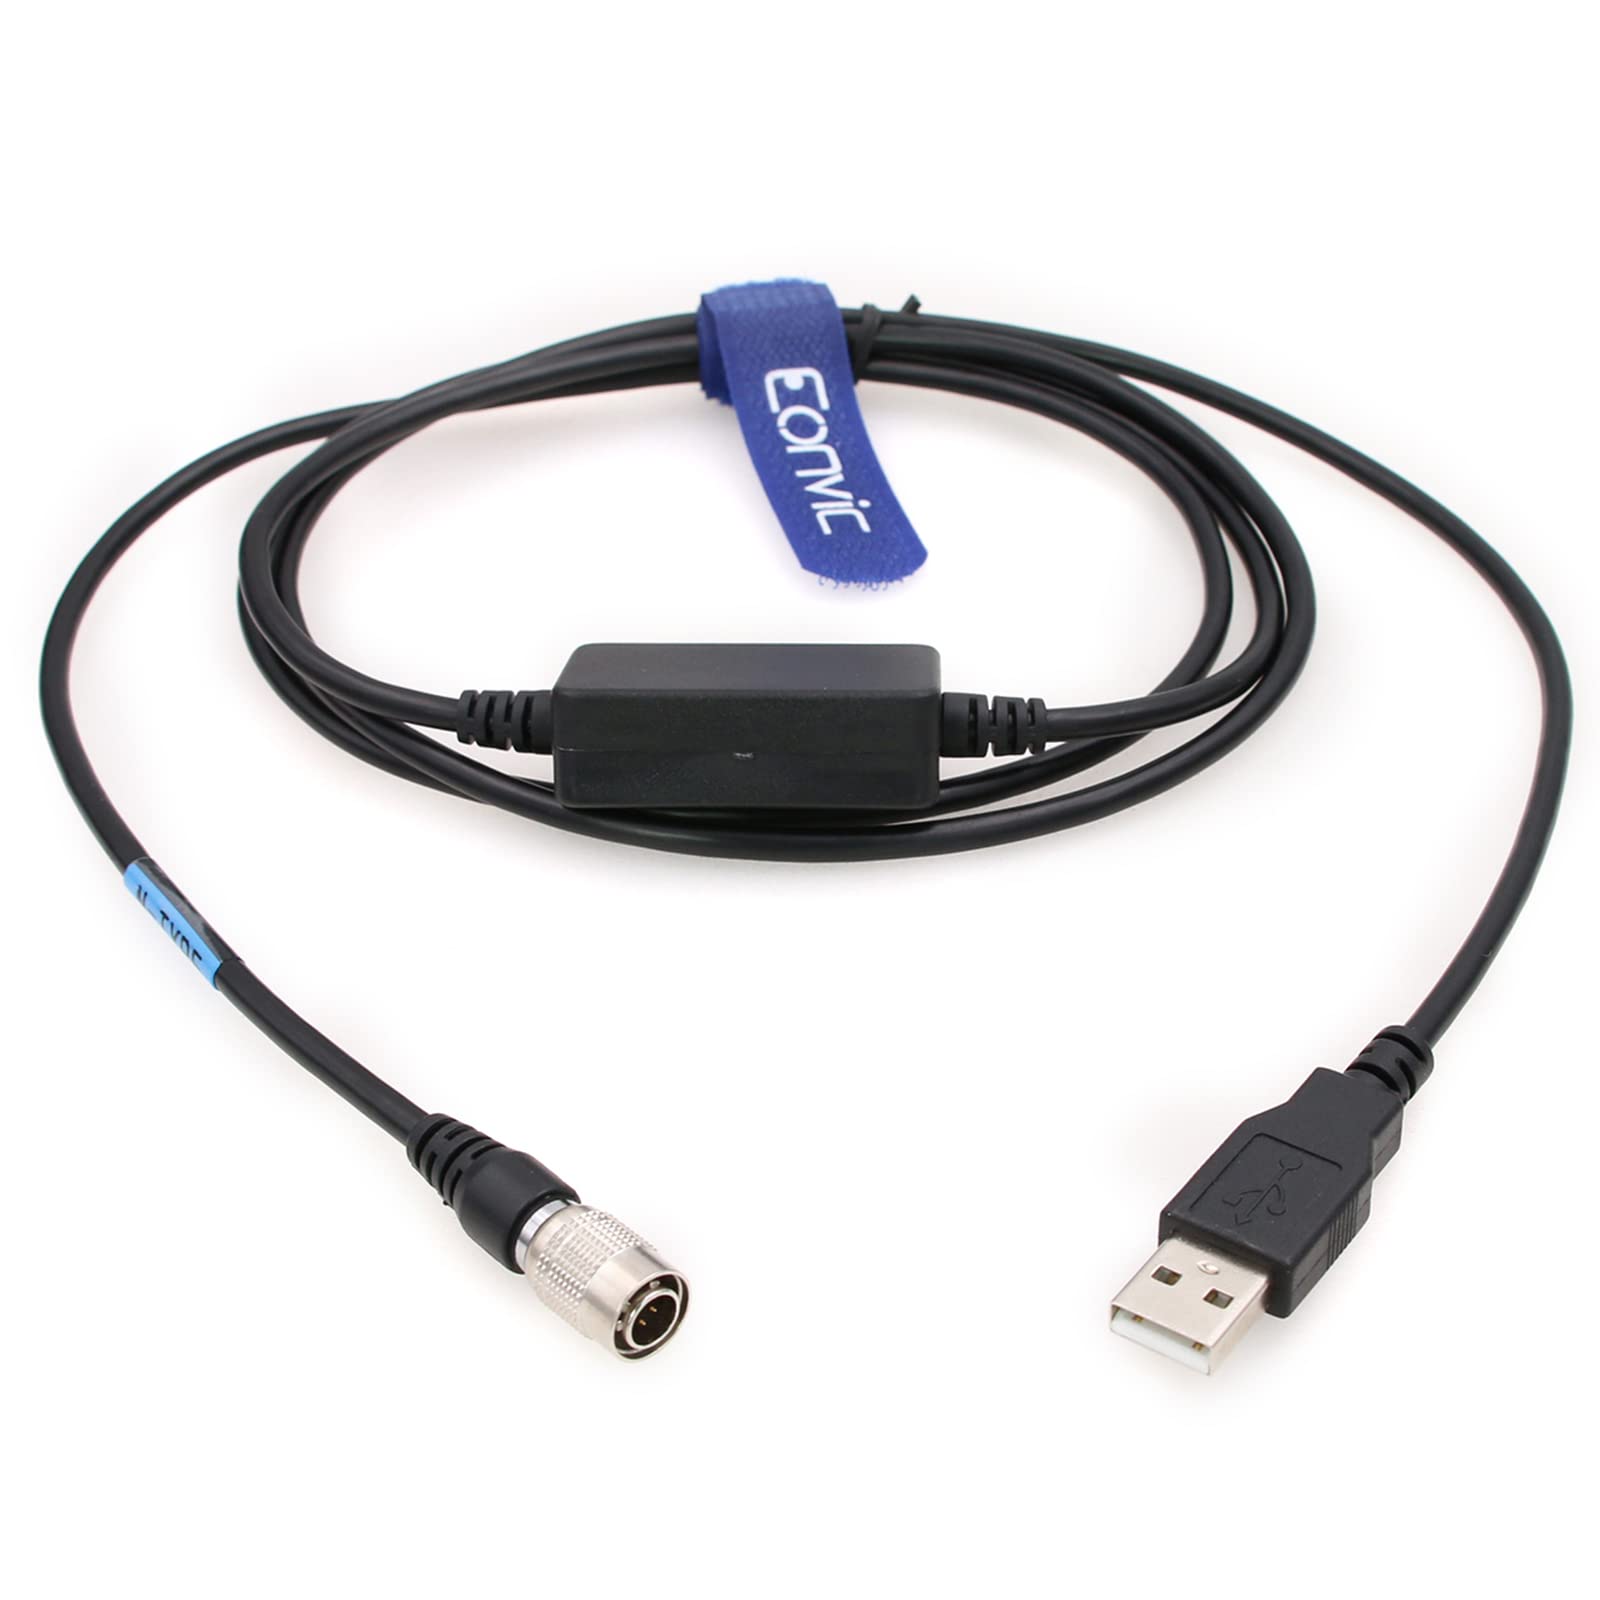 Eonvic USB for 6pin Data Cable for Nikon Total Stations DTM-322/352/452C/532 NPL-332,Win7/8/9 (for Windows 11)